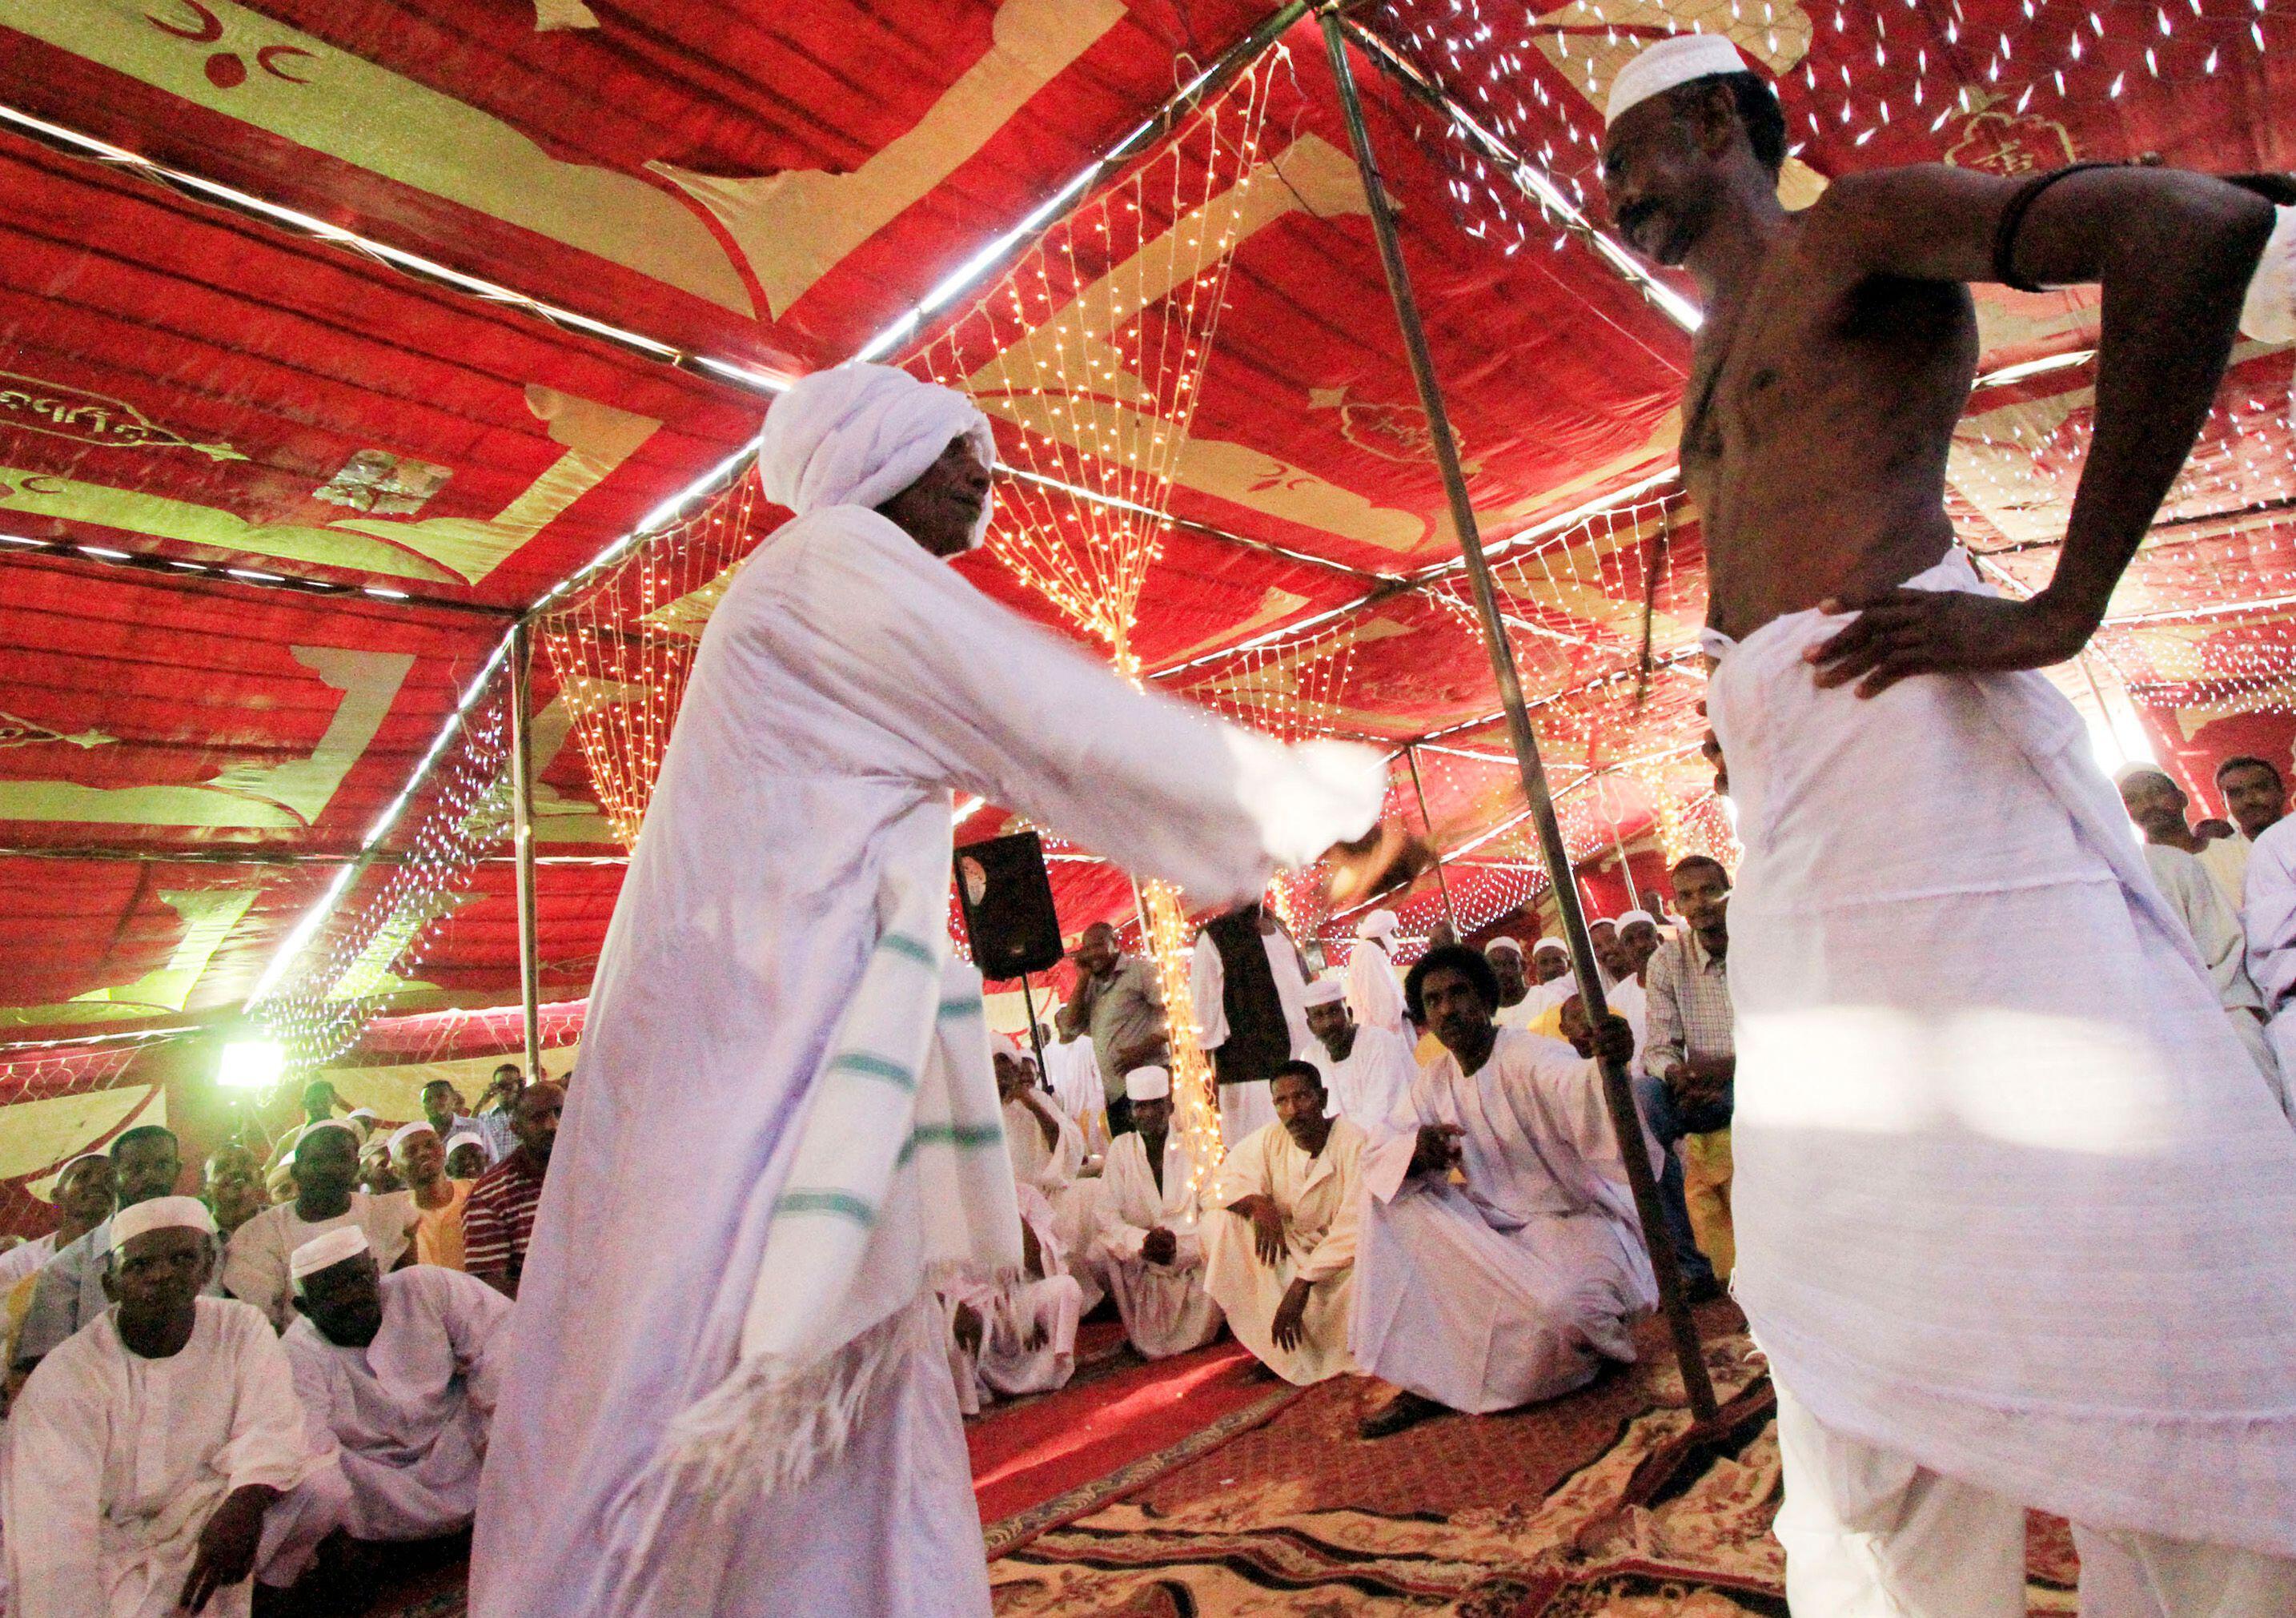 The Sudanese tradition of whipping in wedding ceremonies stands the test of  time